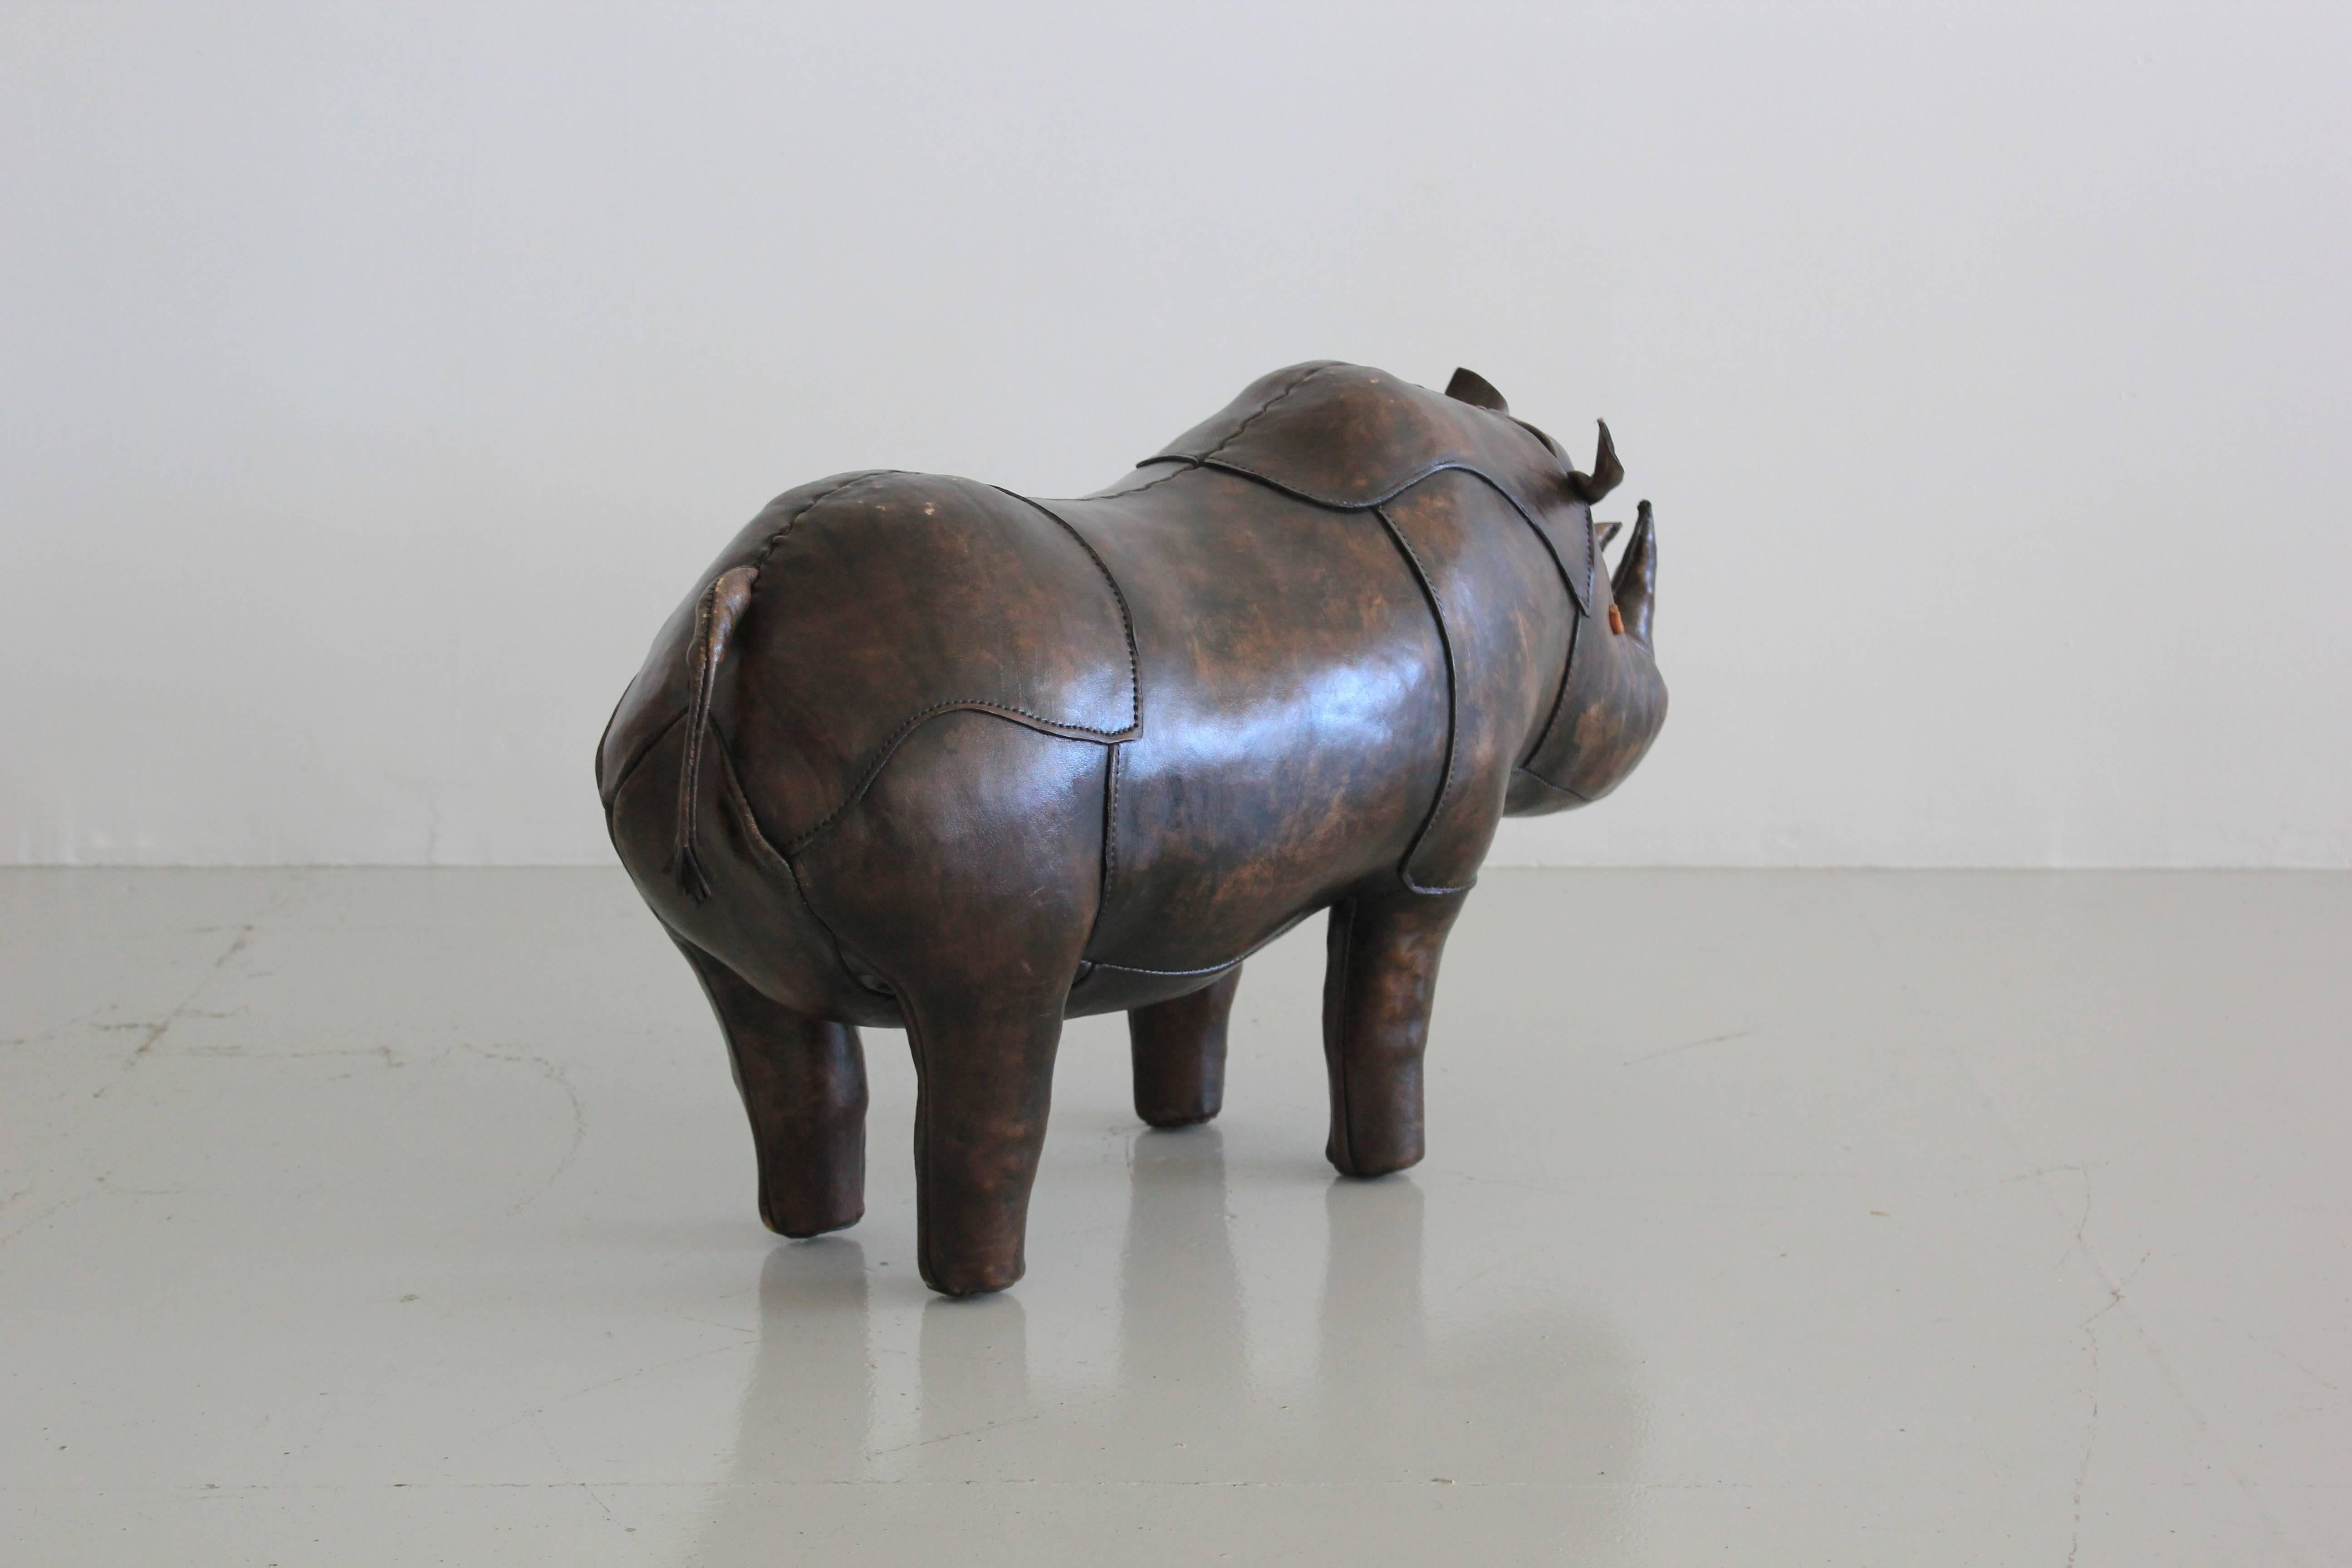 Originally developed in the 1960s by Dimitri Omersa as a “LIBERTY” exclusive, this original leather rhino is newer edition with beautiful patina to leather.